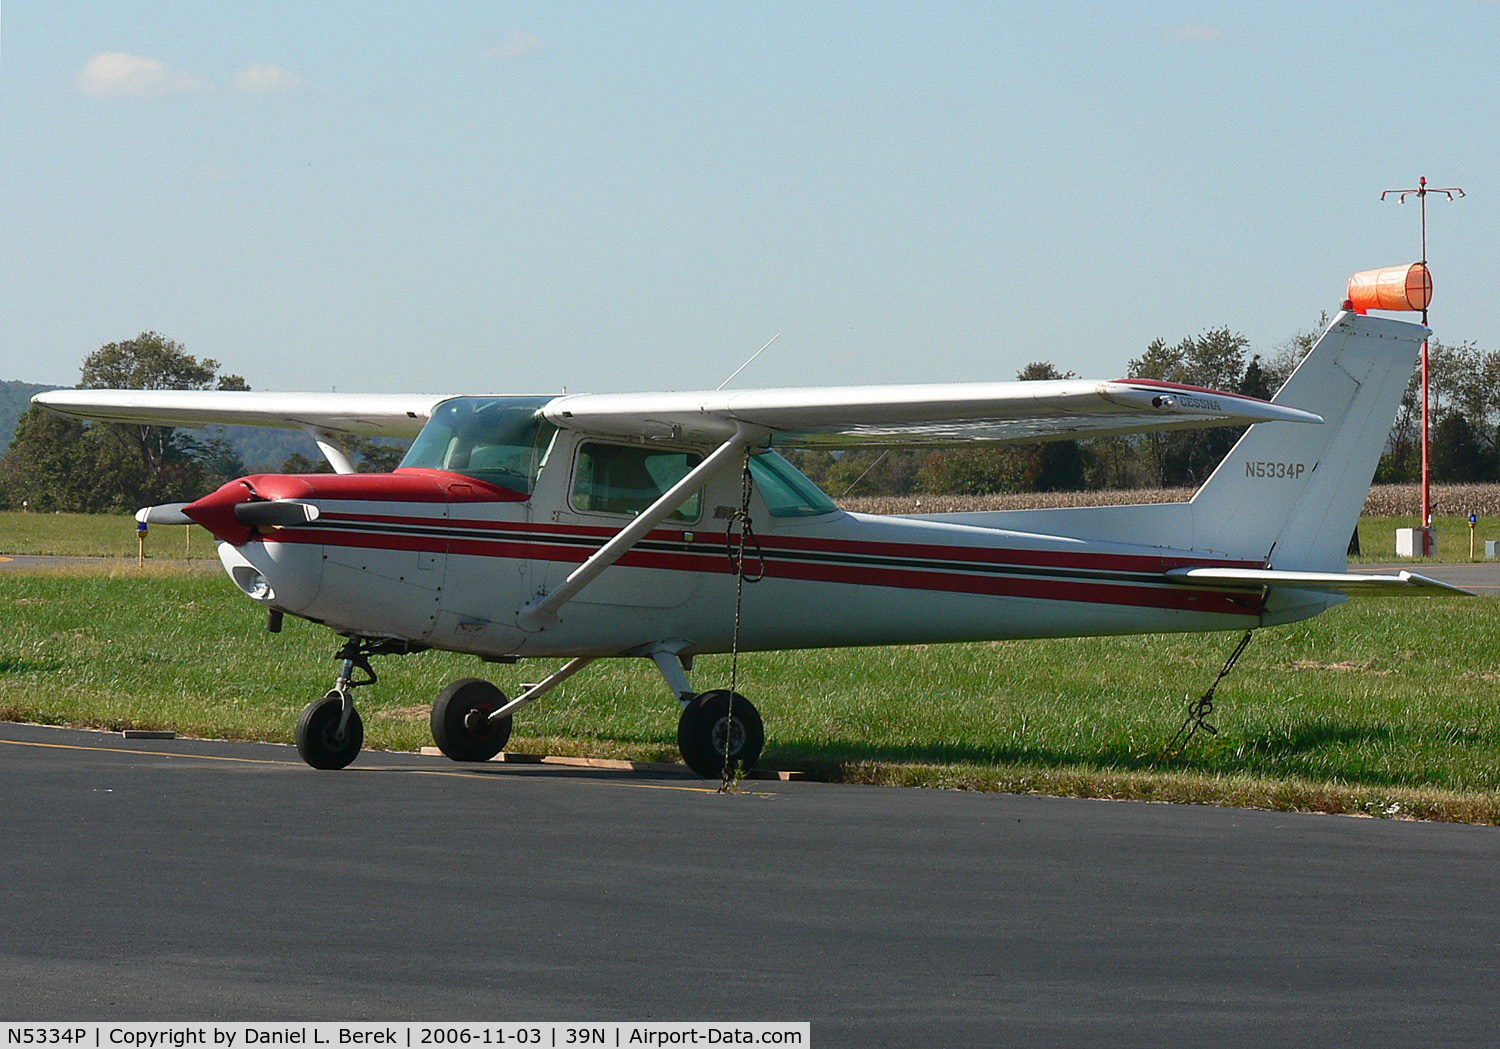 N5334P, 1981 Cessna 152 C/N 15284918, Cute 1981 Cessna 152 enjoys the New Jersey fall foliage at Princeton Airport.